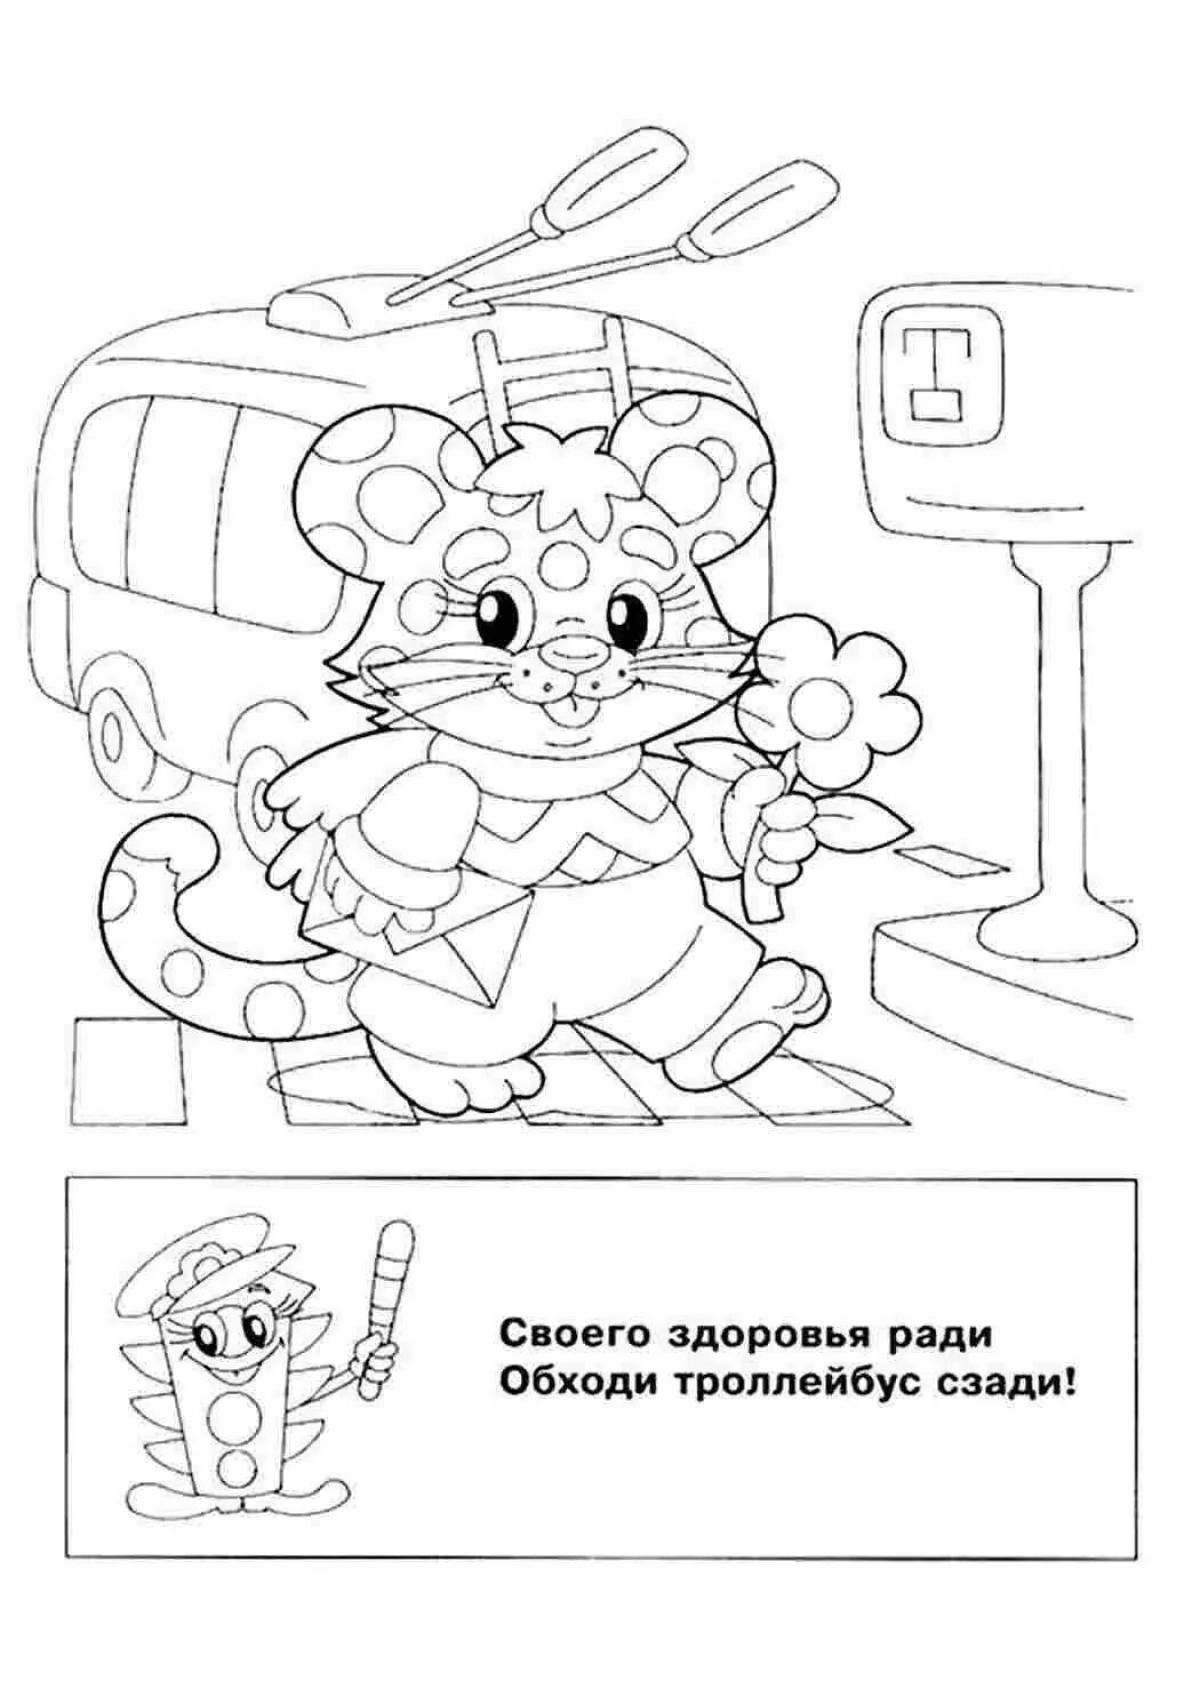 Safety alphabet coloring book for kids